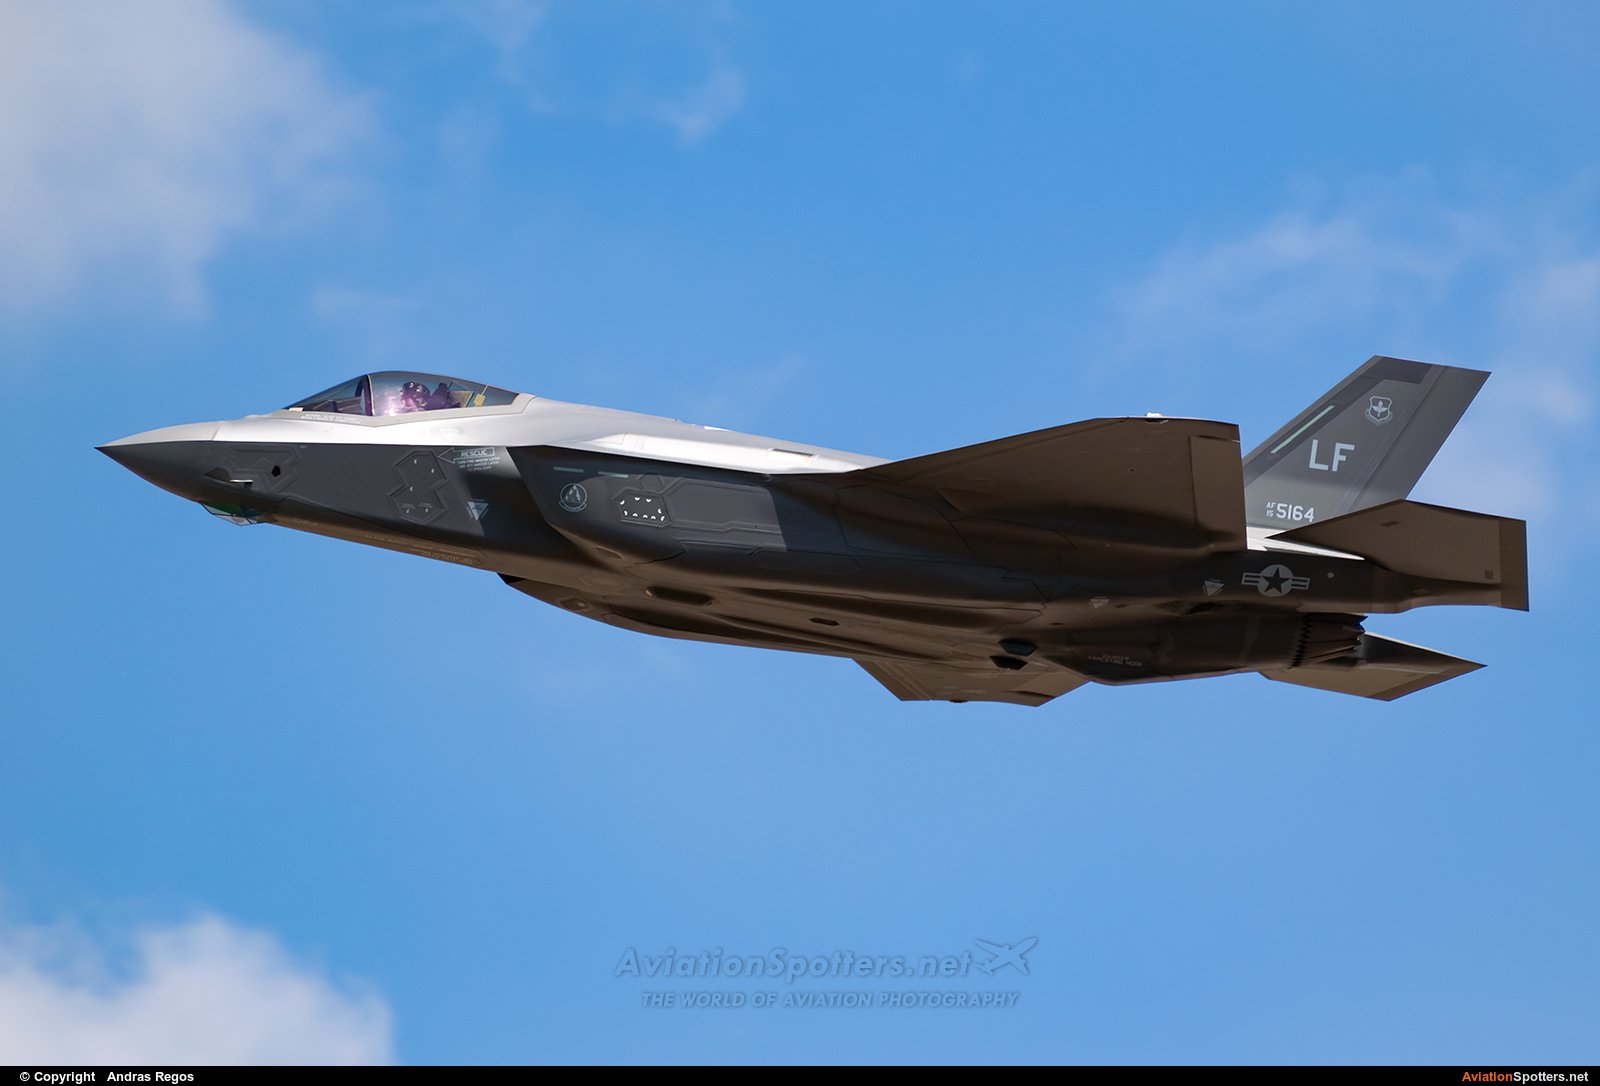 USA - Air Force  -  F-35A Lightning II  (15-5164) By Andras Regos (regos)